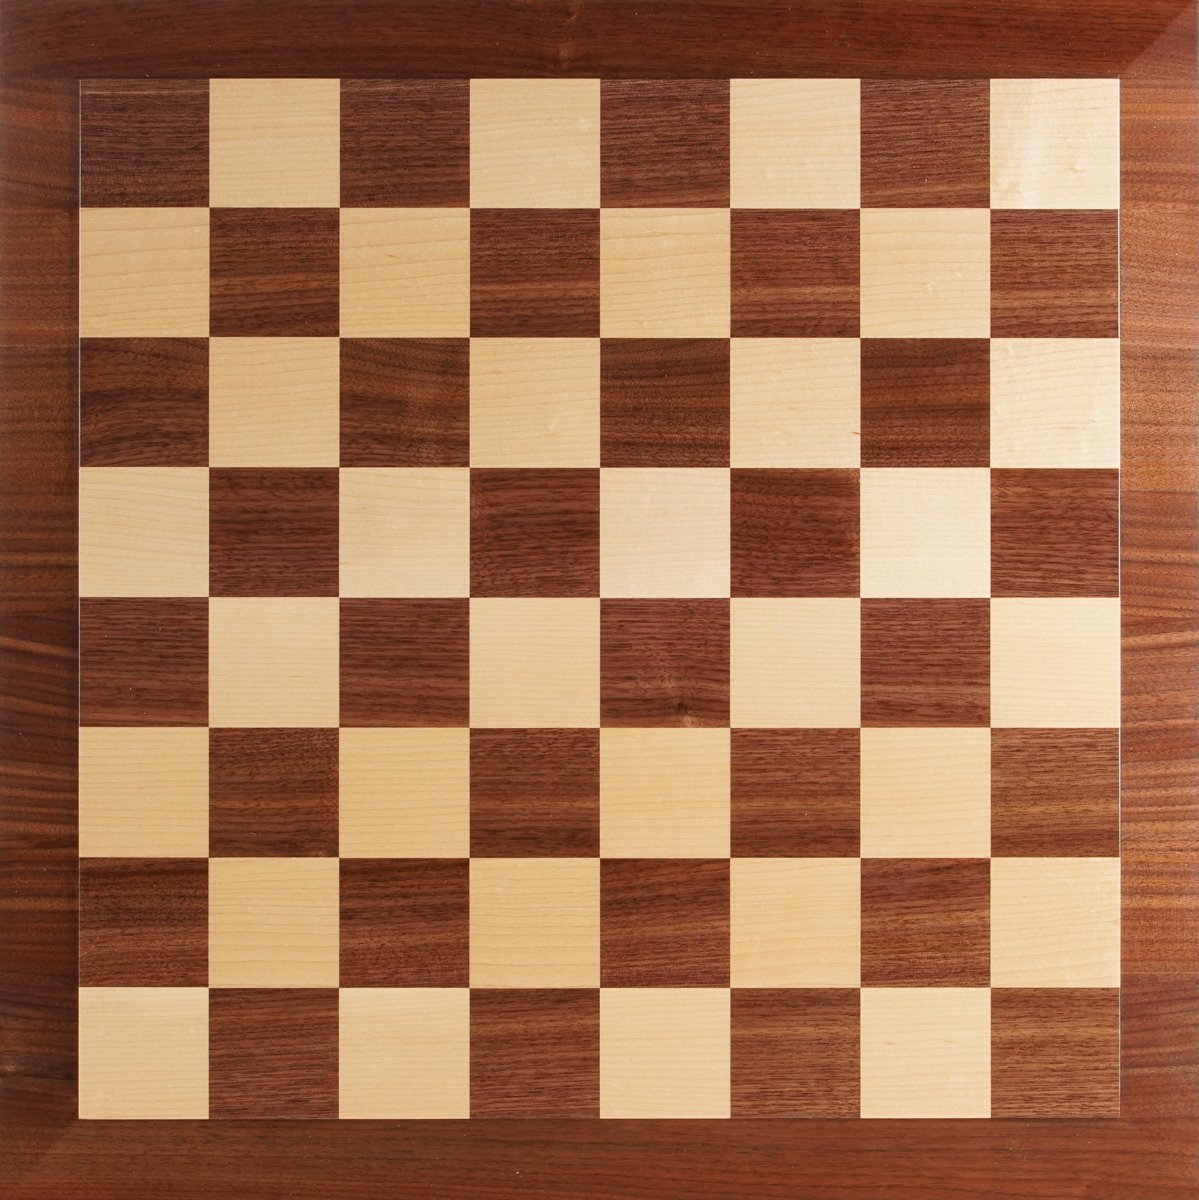 Raised Edge Style 21" Hardwood Player's Chessboard 2.25" Squares JLP, USA (DISCOUNTED FOR IMPERFECTION) - Board - Chess-House